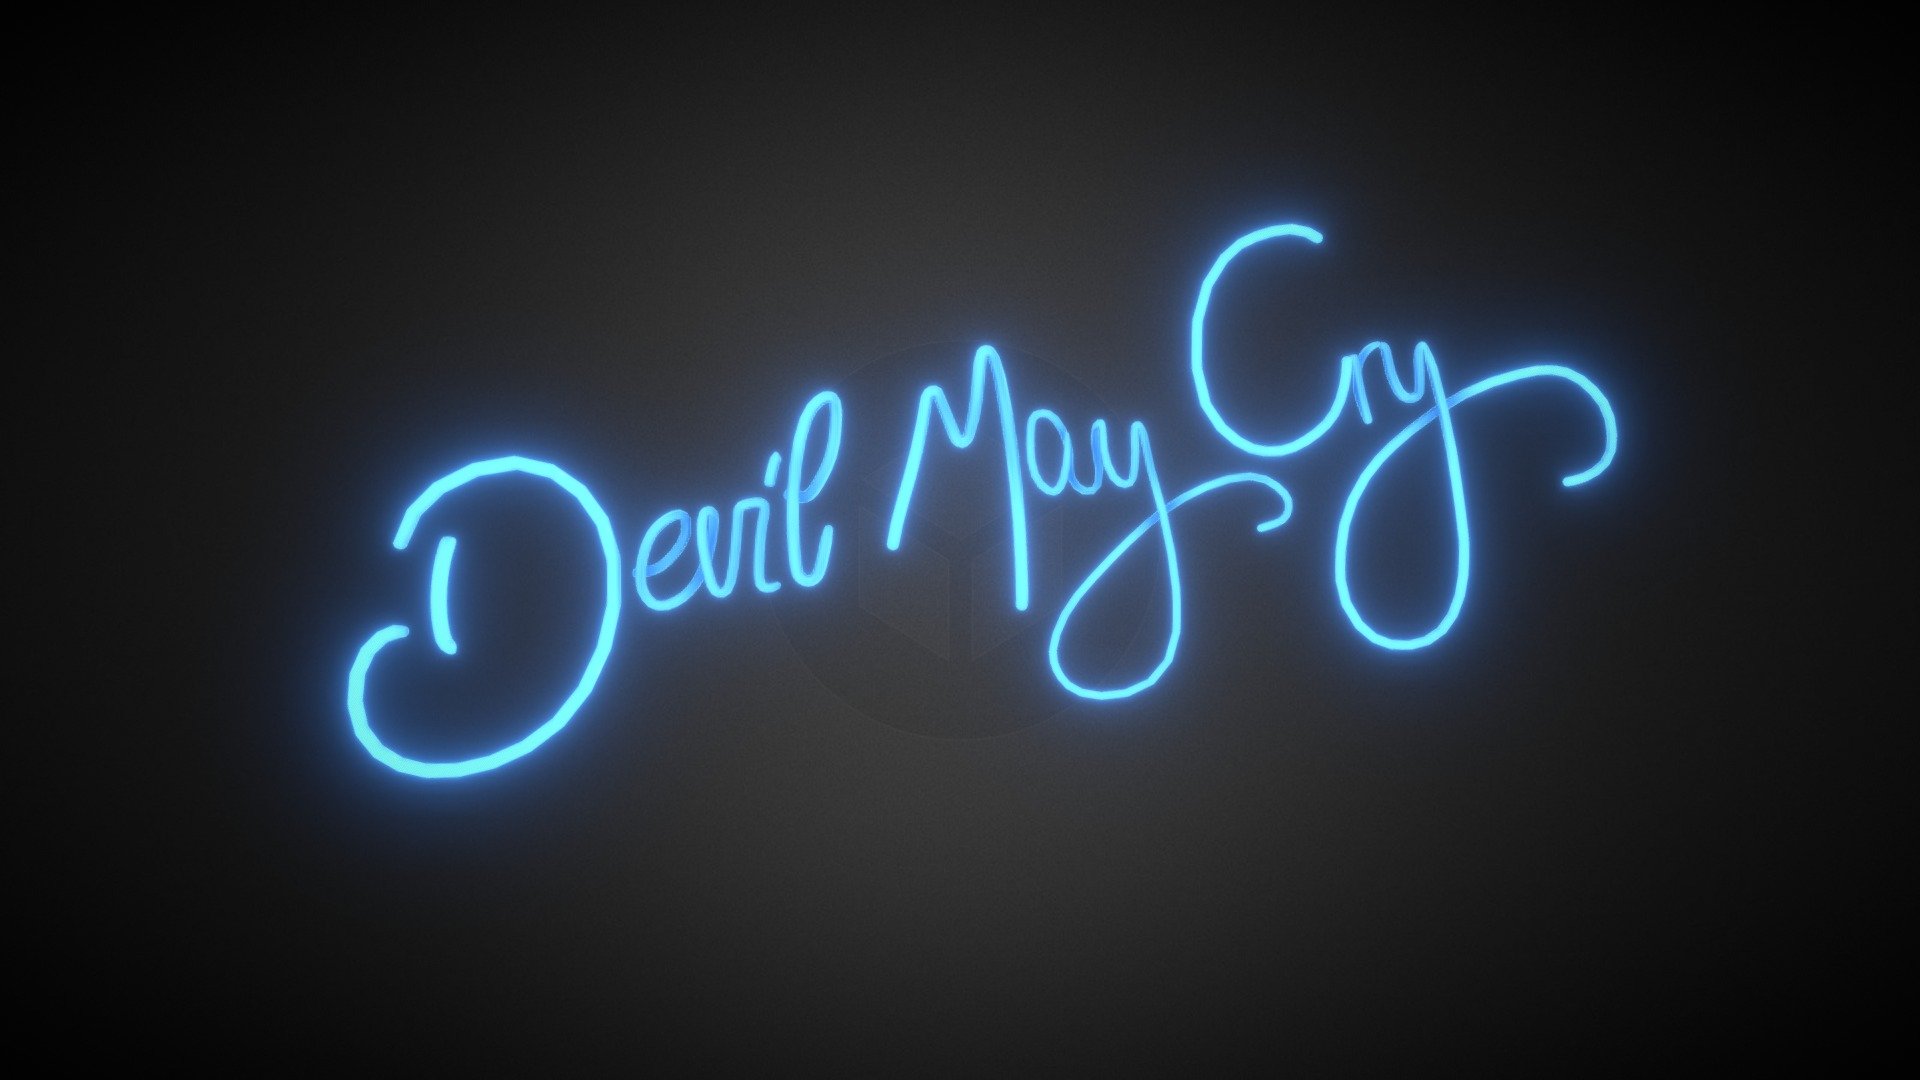 Devil may cry 5 Sign